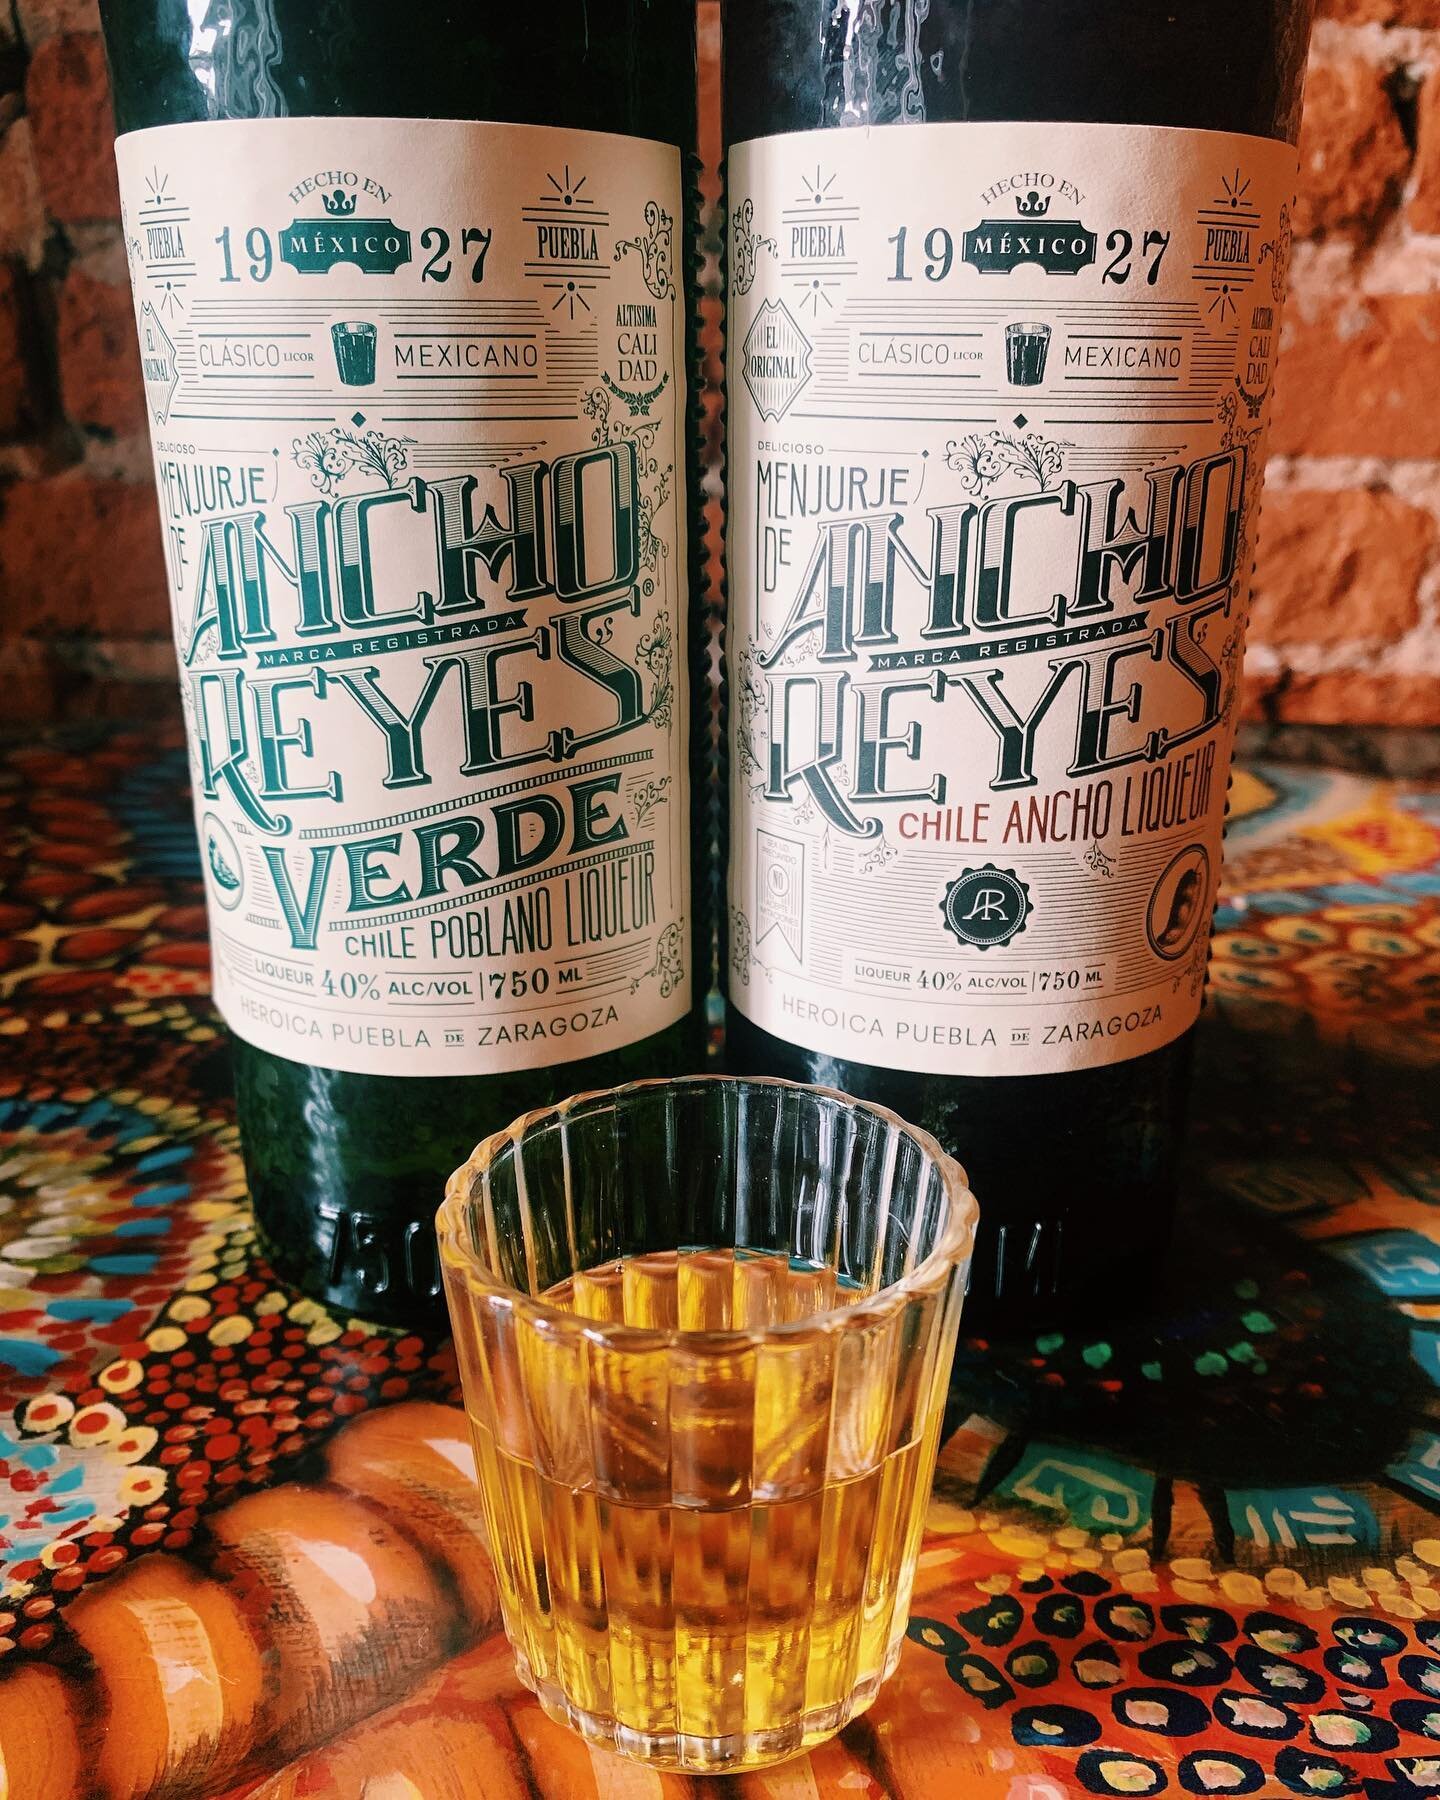 For this Wednesday&rsquo;s tasting, we are featuring Ancho Reyes for a cocktail collaboration. This unique Ancho Chile liqueur comes from a century old recipe from Puebla, Mexico which harnesses roasted ancho chiles in a sugar cane distillate to crea